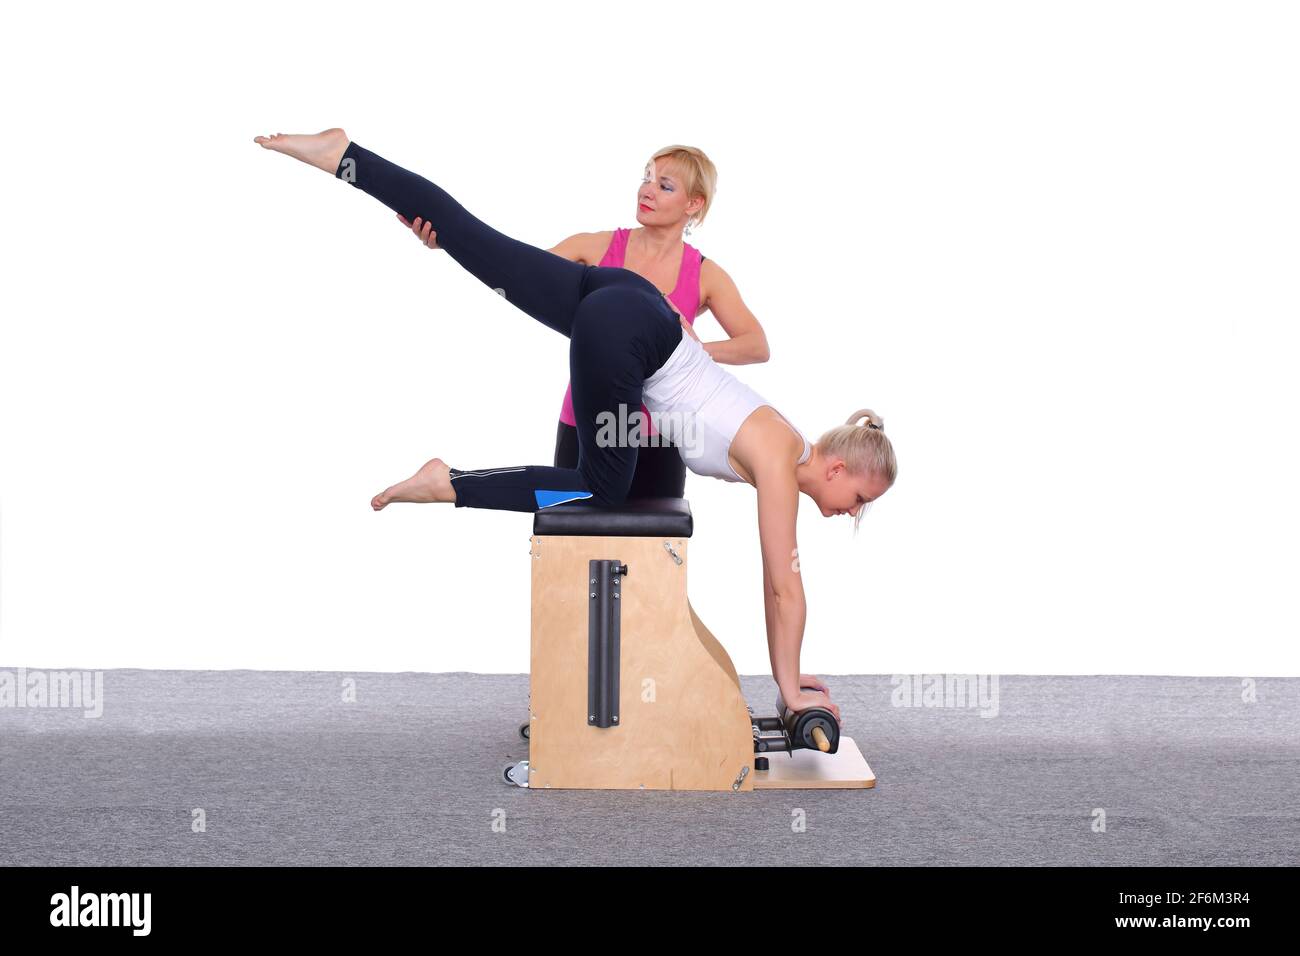 https://c8.alamy.com/comp/2F6M3R4/a-50-year-old-trainer-teaches-a-young-girl-to-practice-pilates-on-an-elevator-chair-by-lifting-her-leg-high-above-her-head-2F6M3R4.jpg